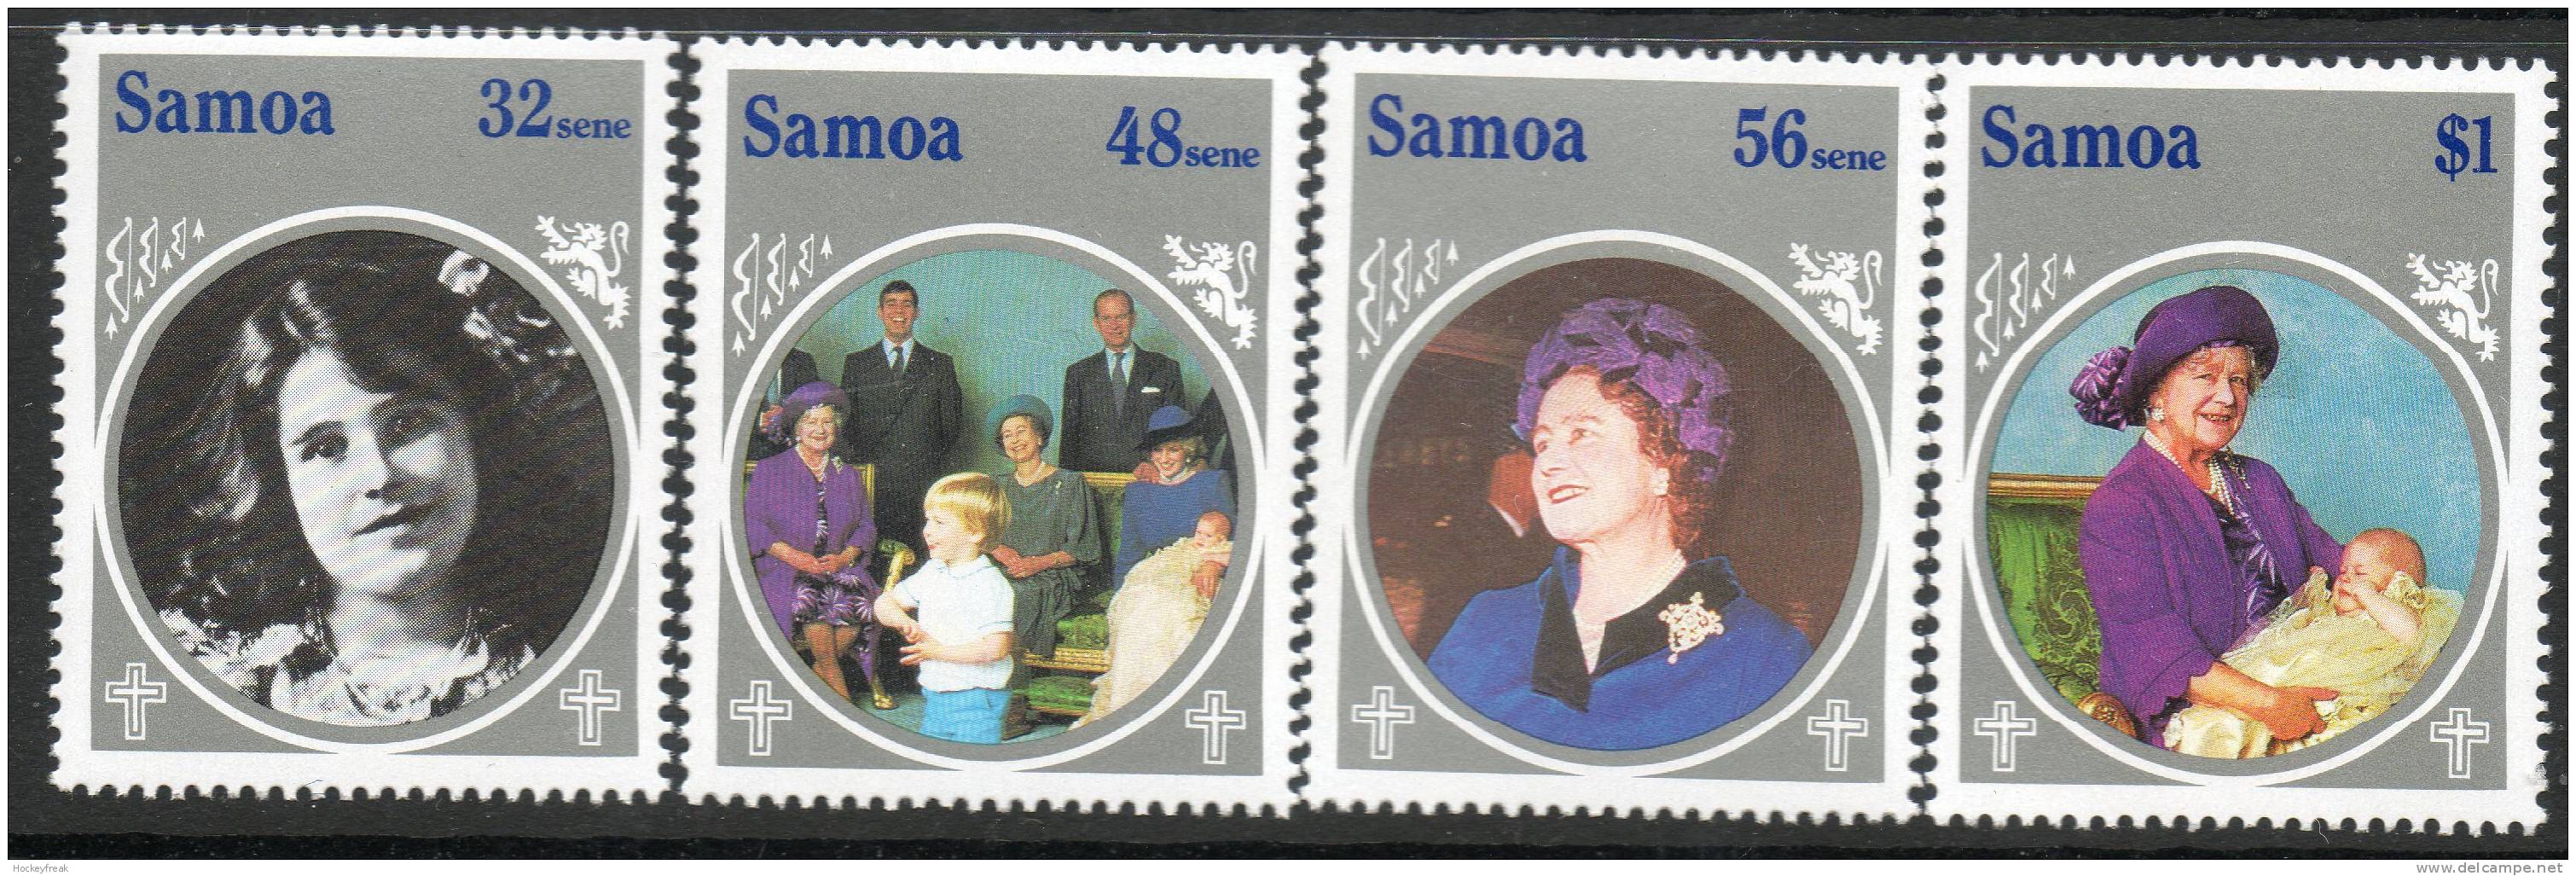 Samoa 1985 - Life & Times Of HM Queen Elizabeth The Queen Mother SG700-703 MNH Cat £4.40 SG2015 - Samoa (Staat)